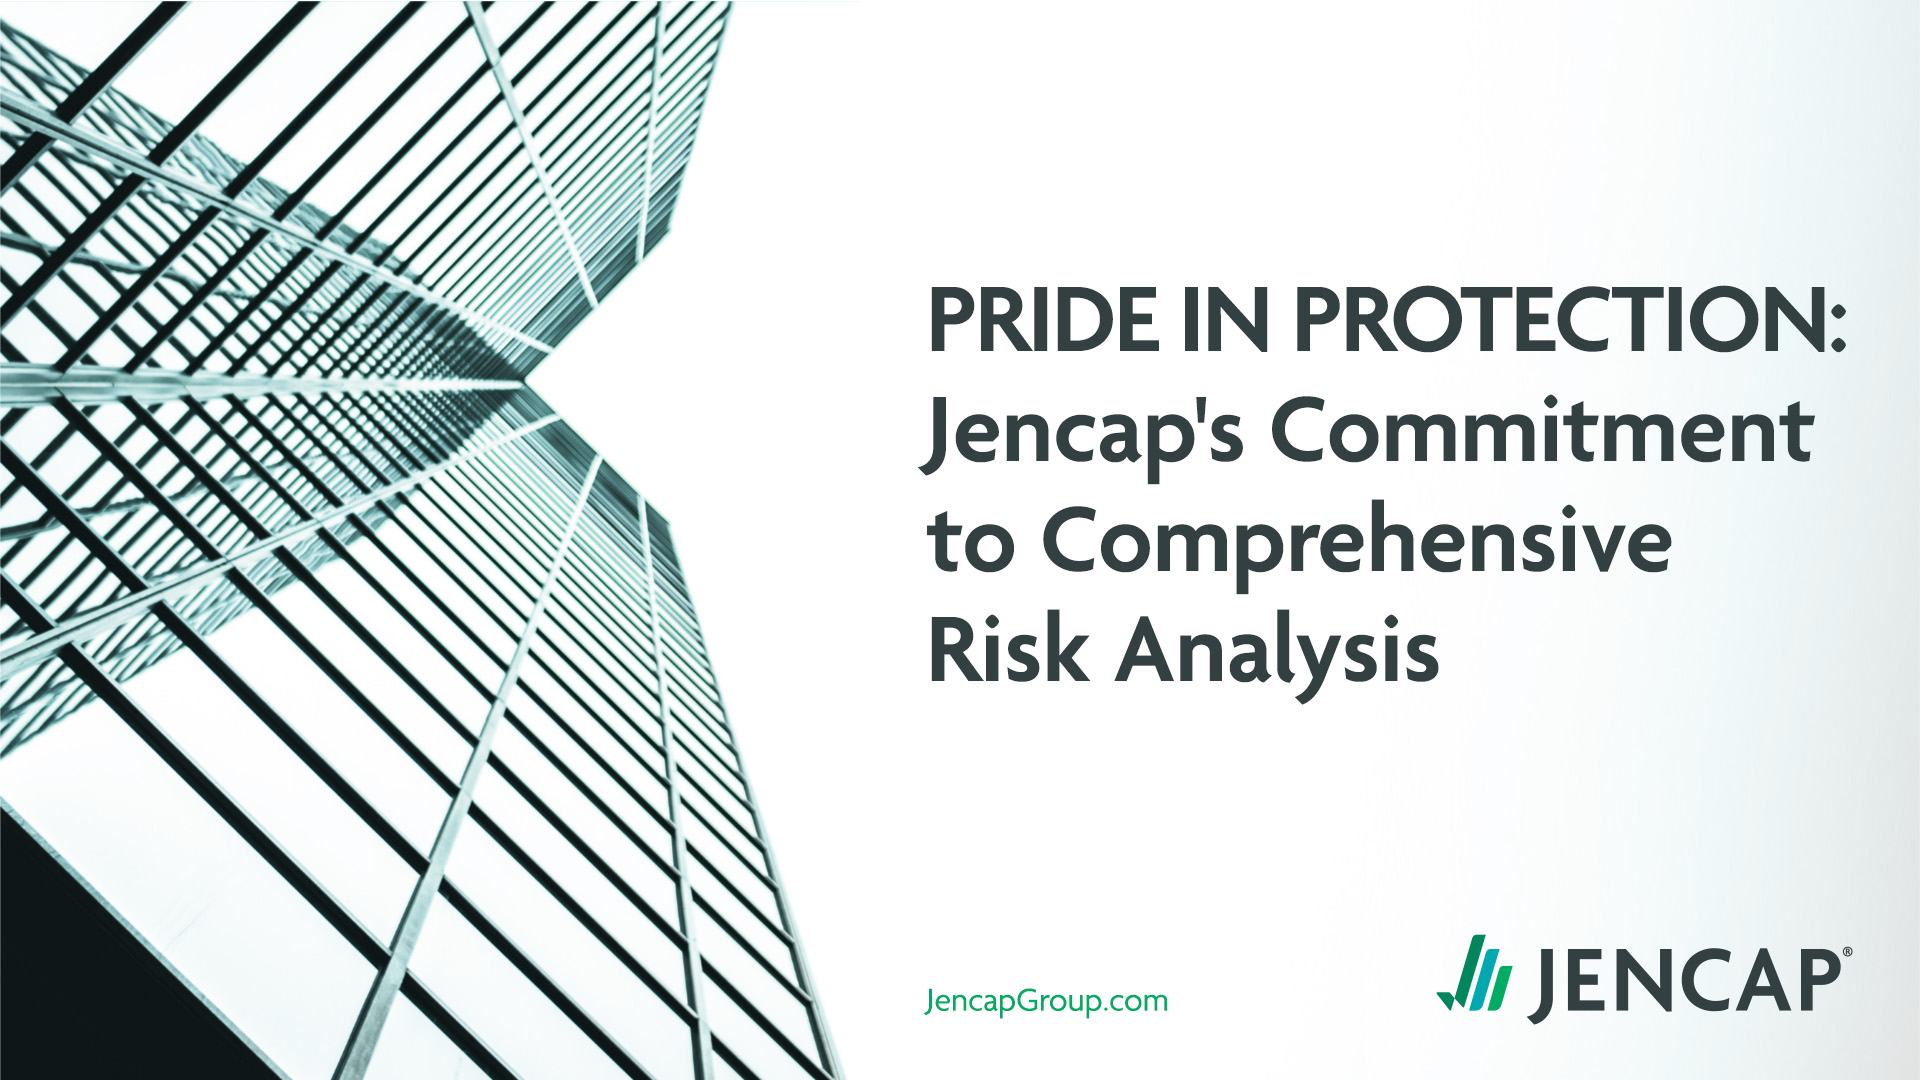 Pride in Protection: Jencap's Commitment to Comprehensive Risk Analysis